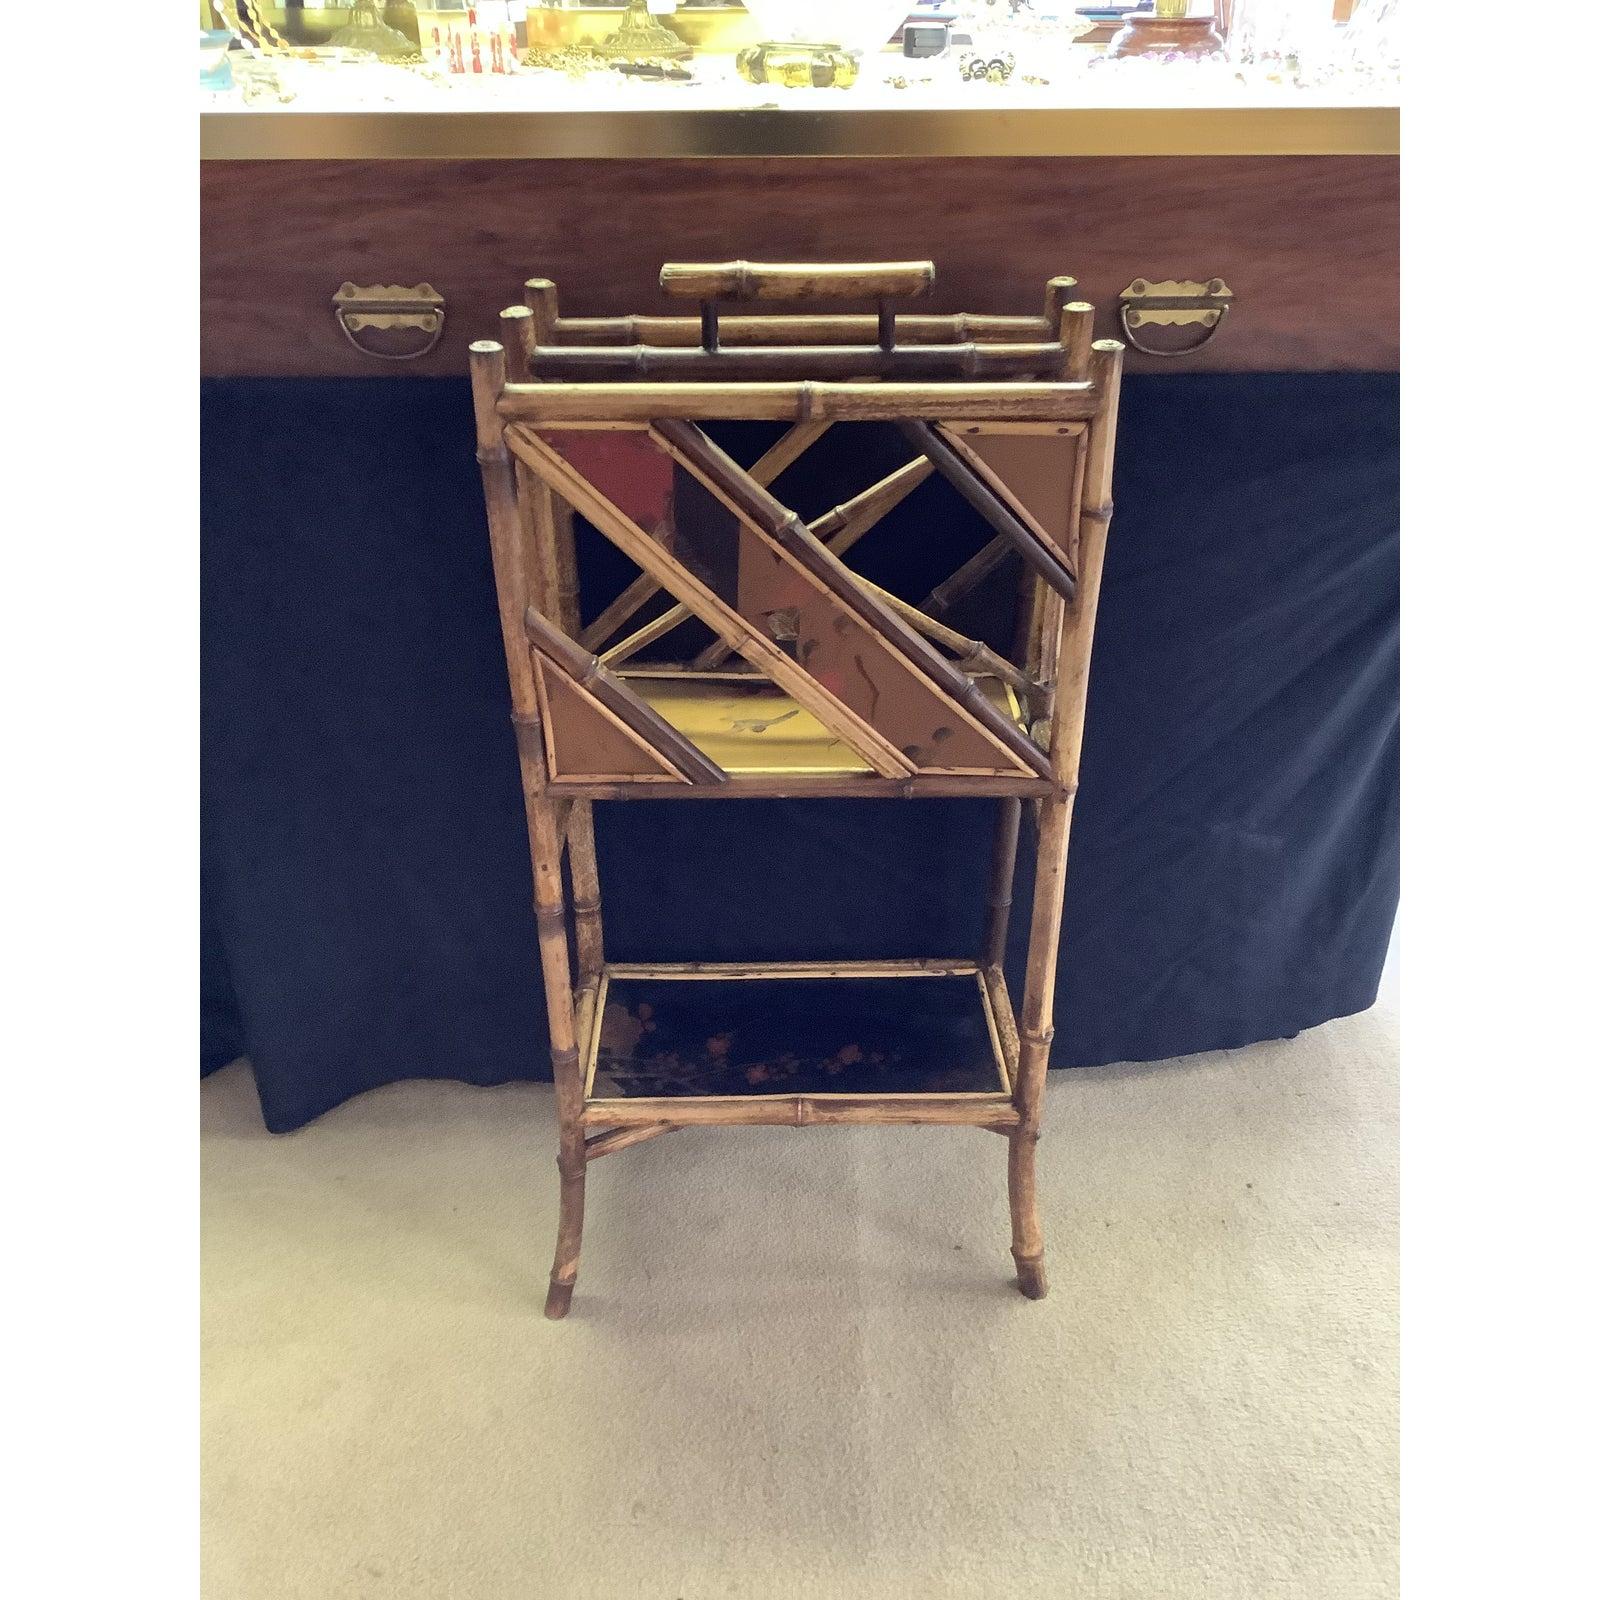 English bamboo Anglo-Japanese magazine rack with two wide slots for magazines, chinoiserie lacquered panels and a large shelf on the bottom. This English magazine holder has beautiful brass fittings.




